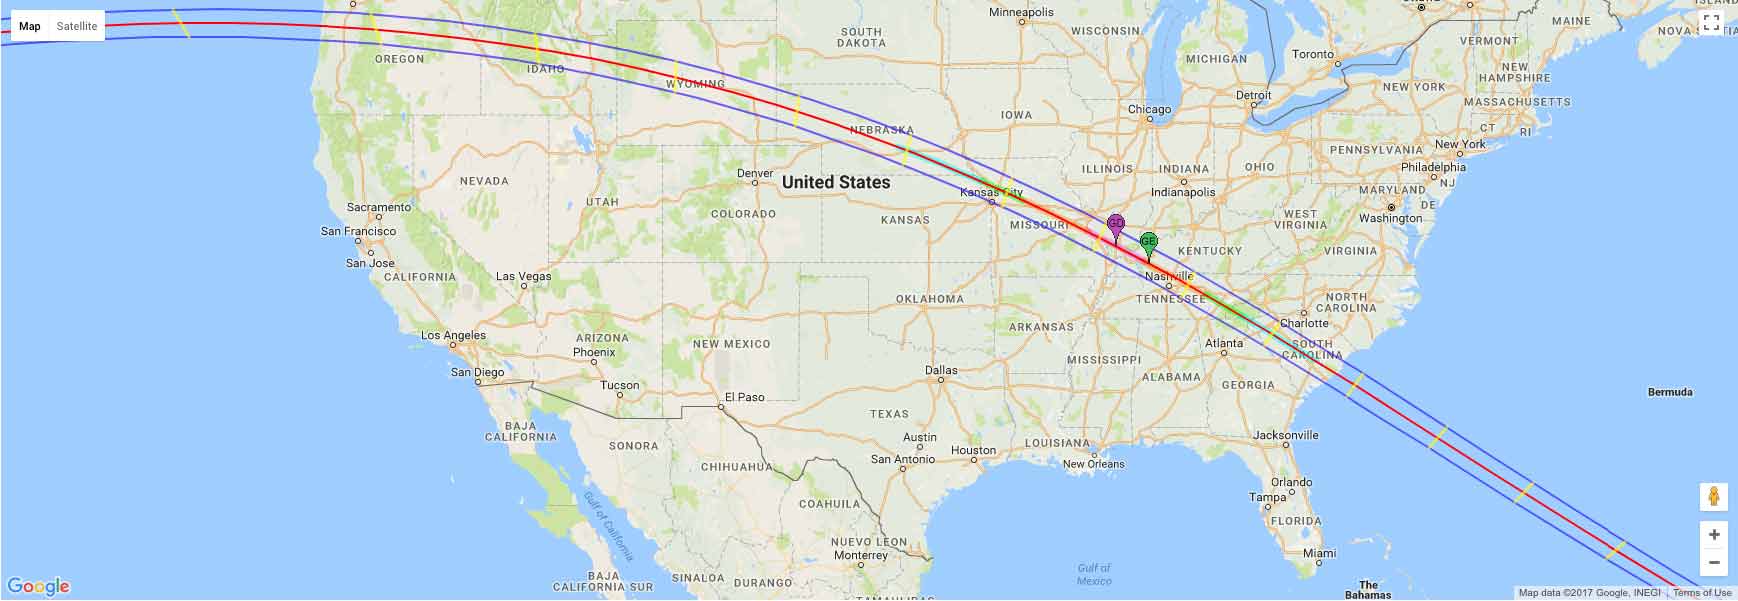 image for how to protect your eyes during the total solar eclipse